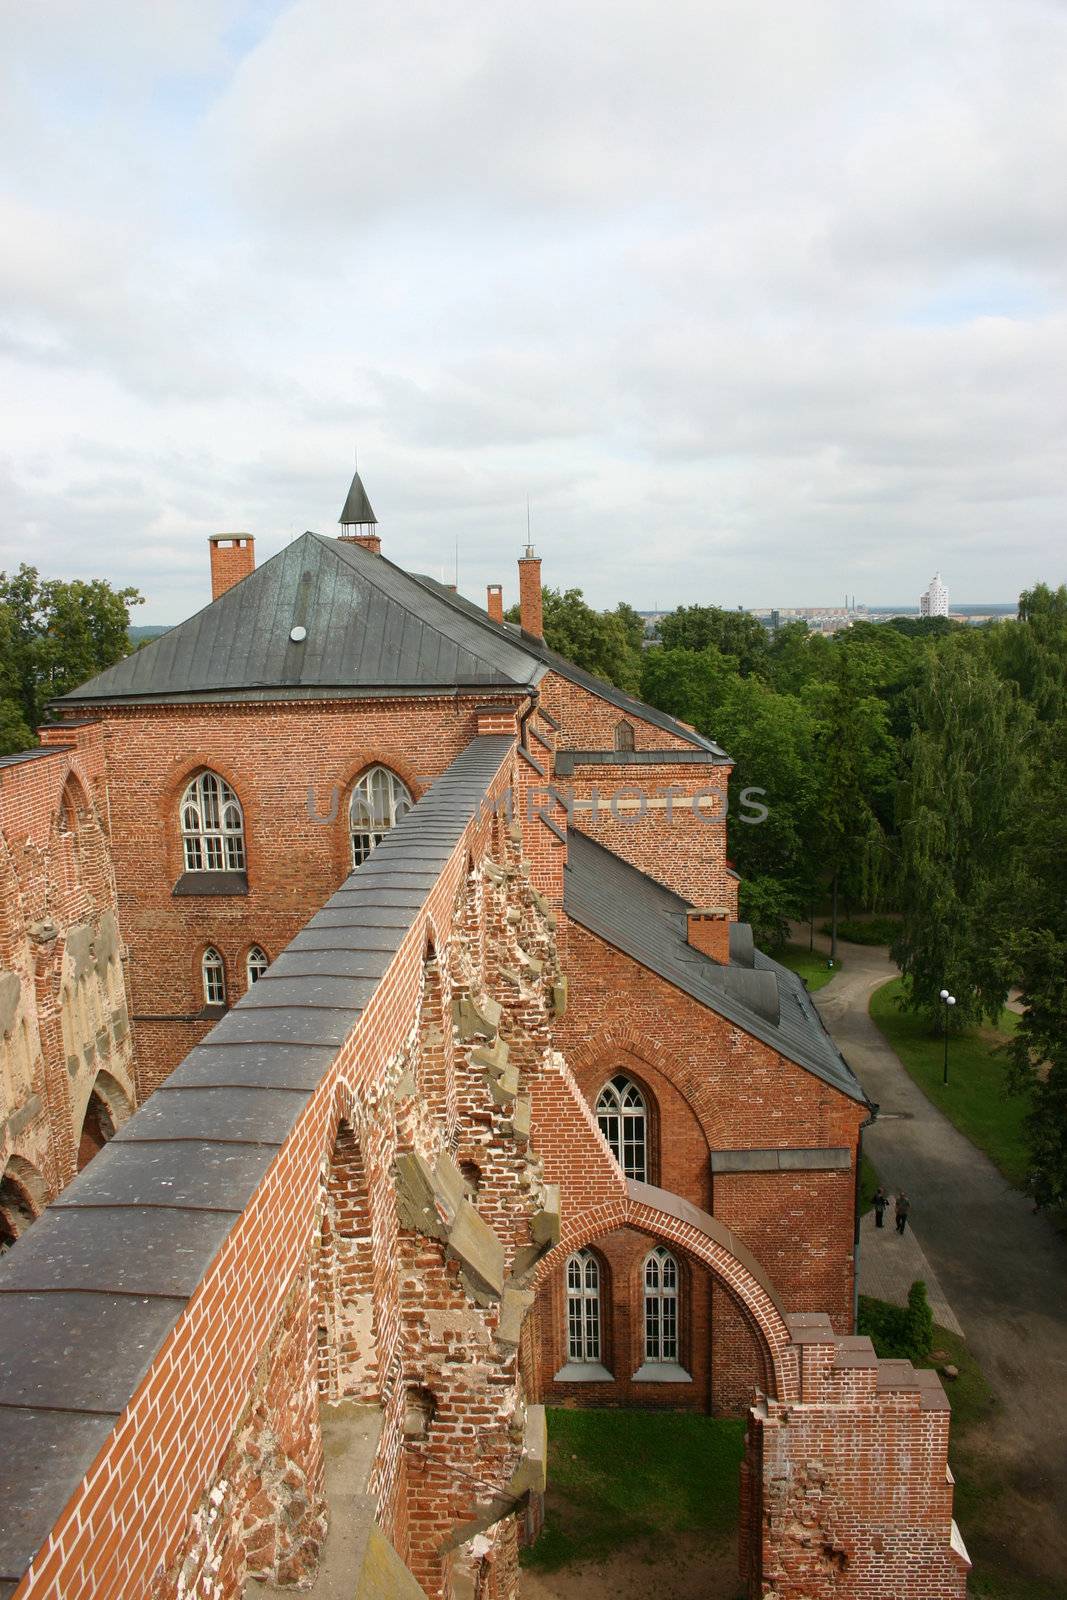 Old City fortress of Tartu, Estonia, kind with top on the right wall and a tower